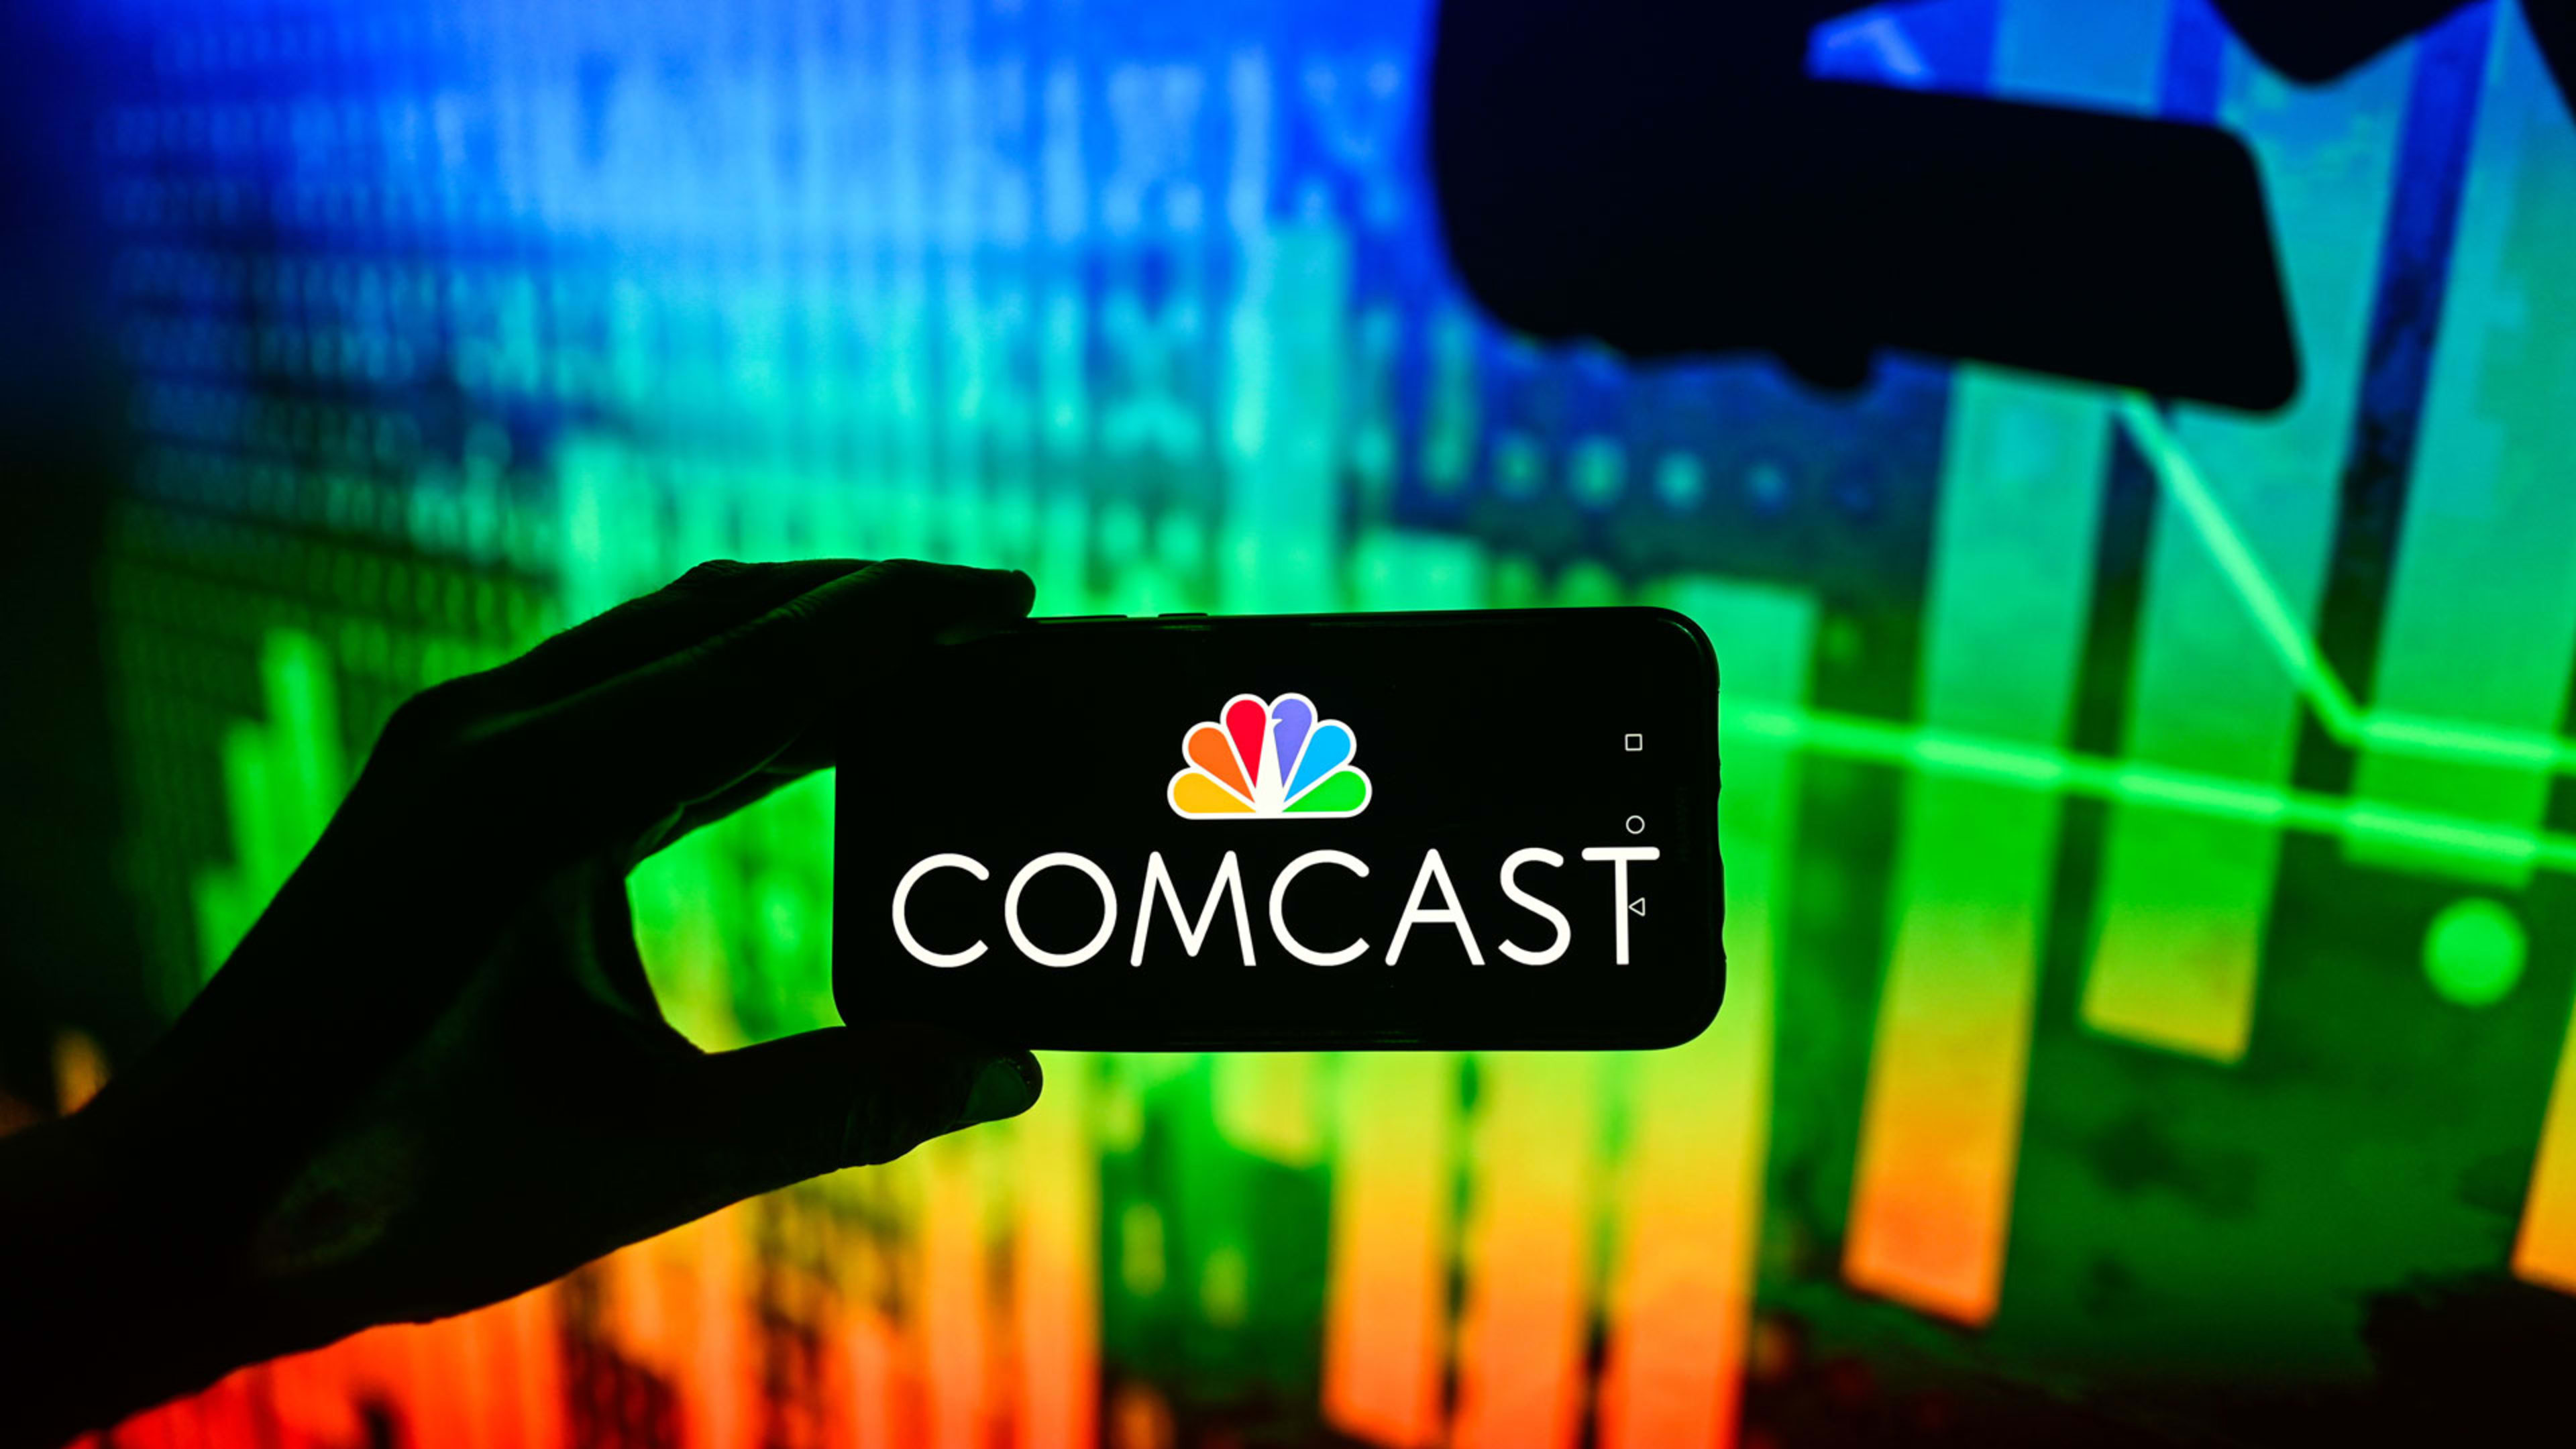 Today’s top business headlines: Comcast hack, the lawsuit against Google, and Apple’s patent dispute